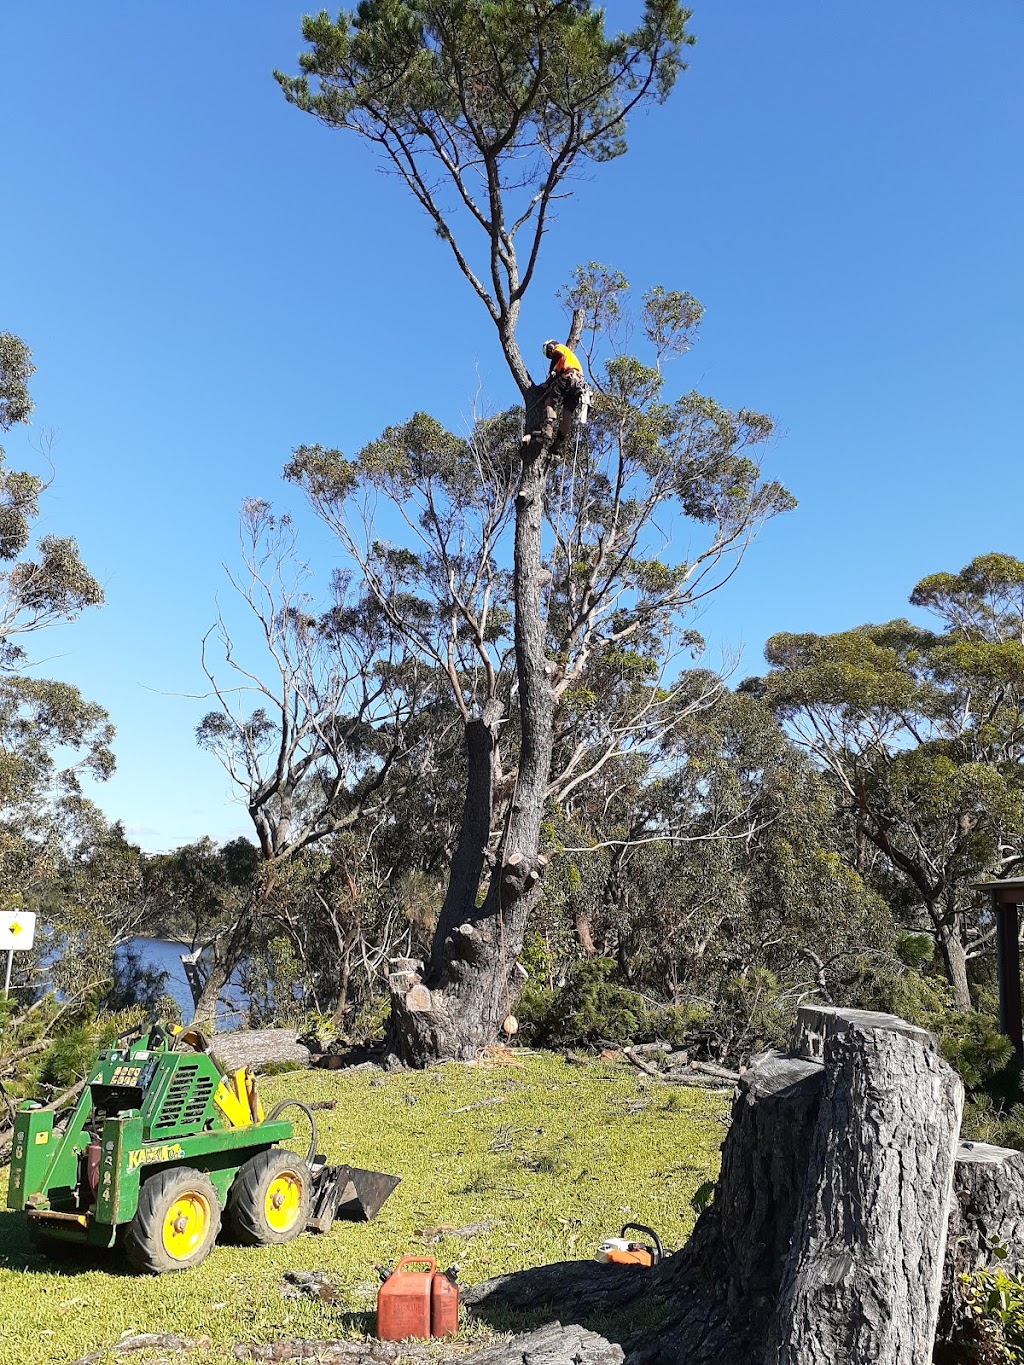 Bay and basin tree service |  | 3 Maxwell Cres, Sanctuary Point NSW 2540, Australia | 0414801730 OR +61 414 801 730